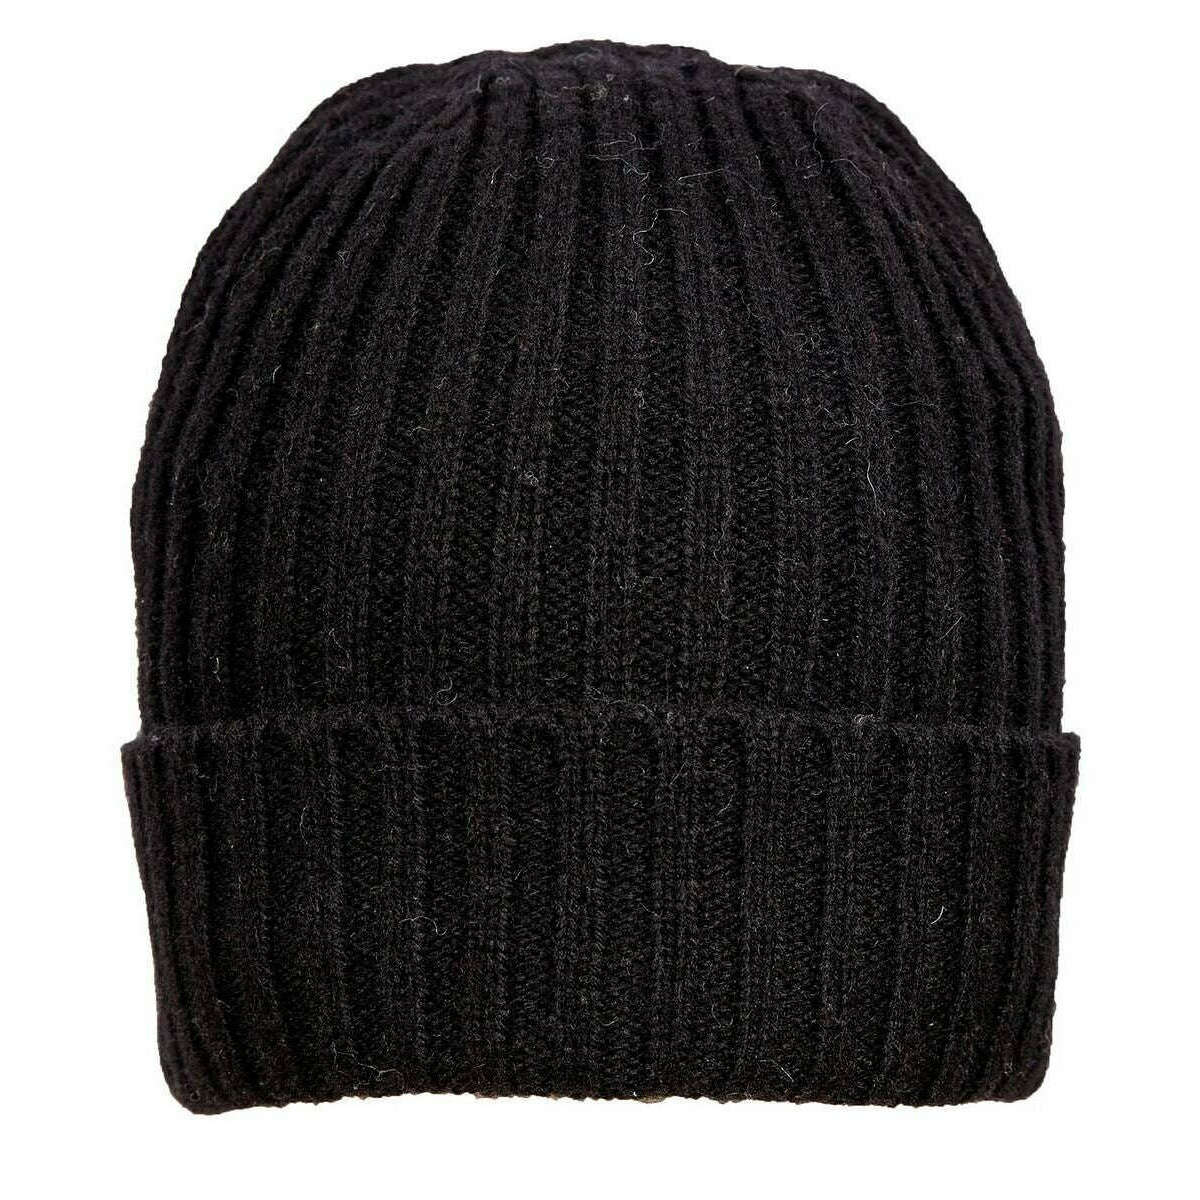 Dents Rib Knit Thinsulate-Lined Beanie Hat - Black